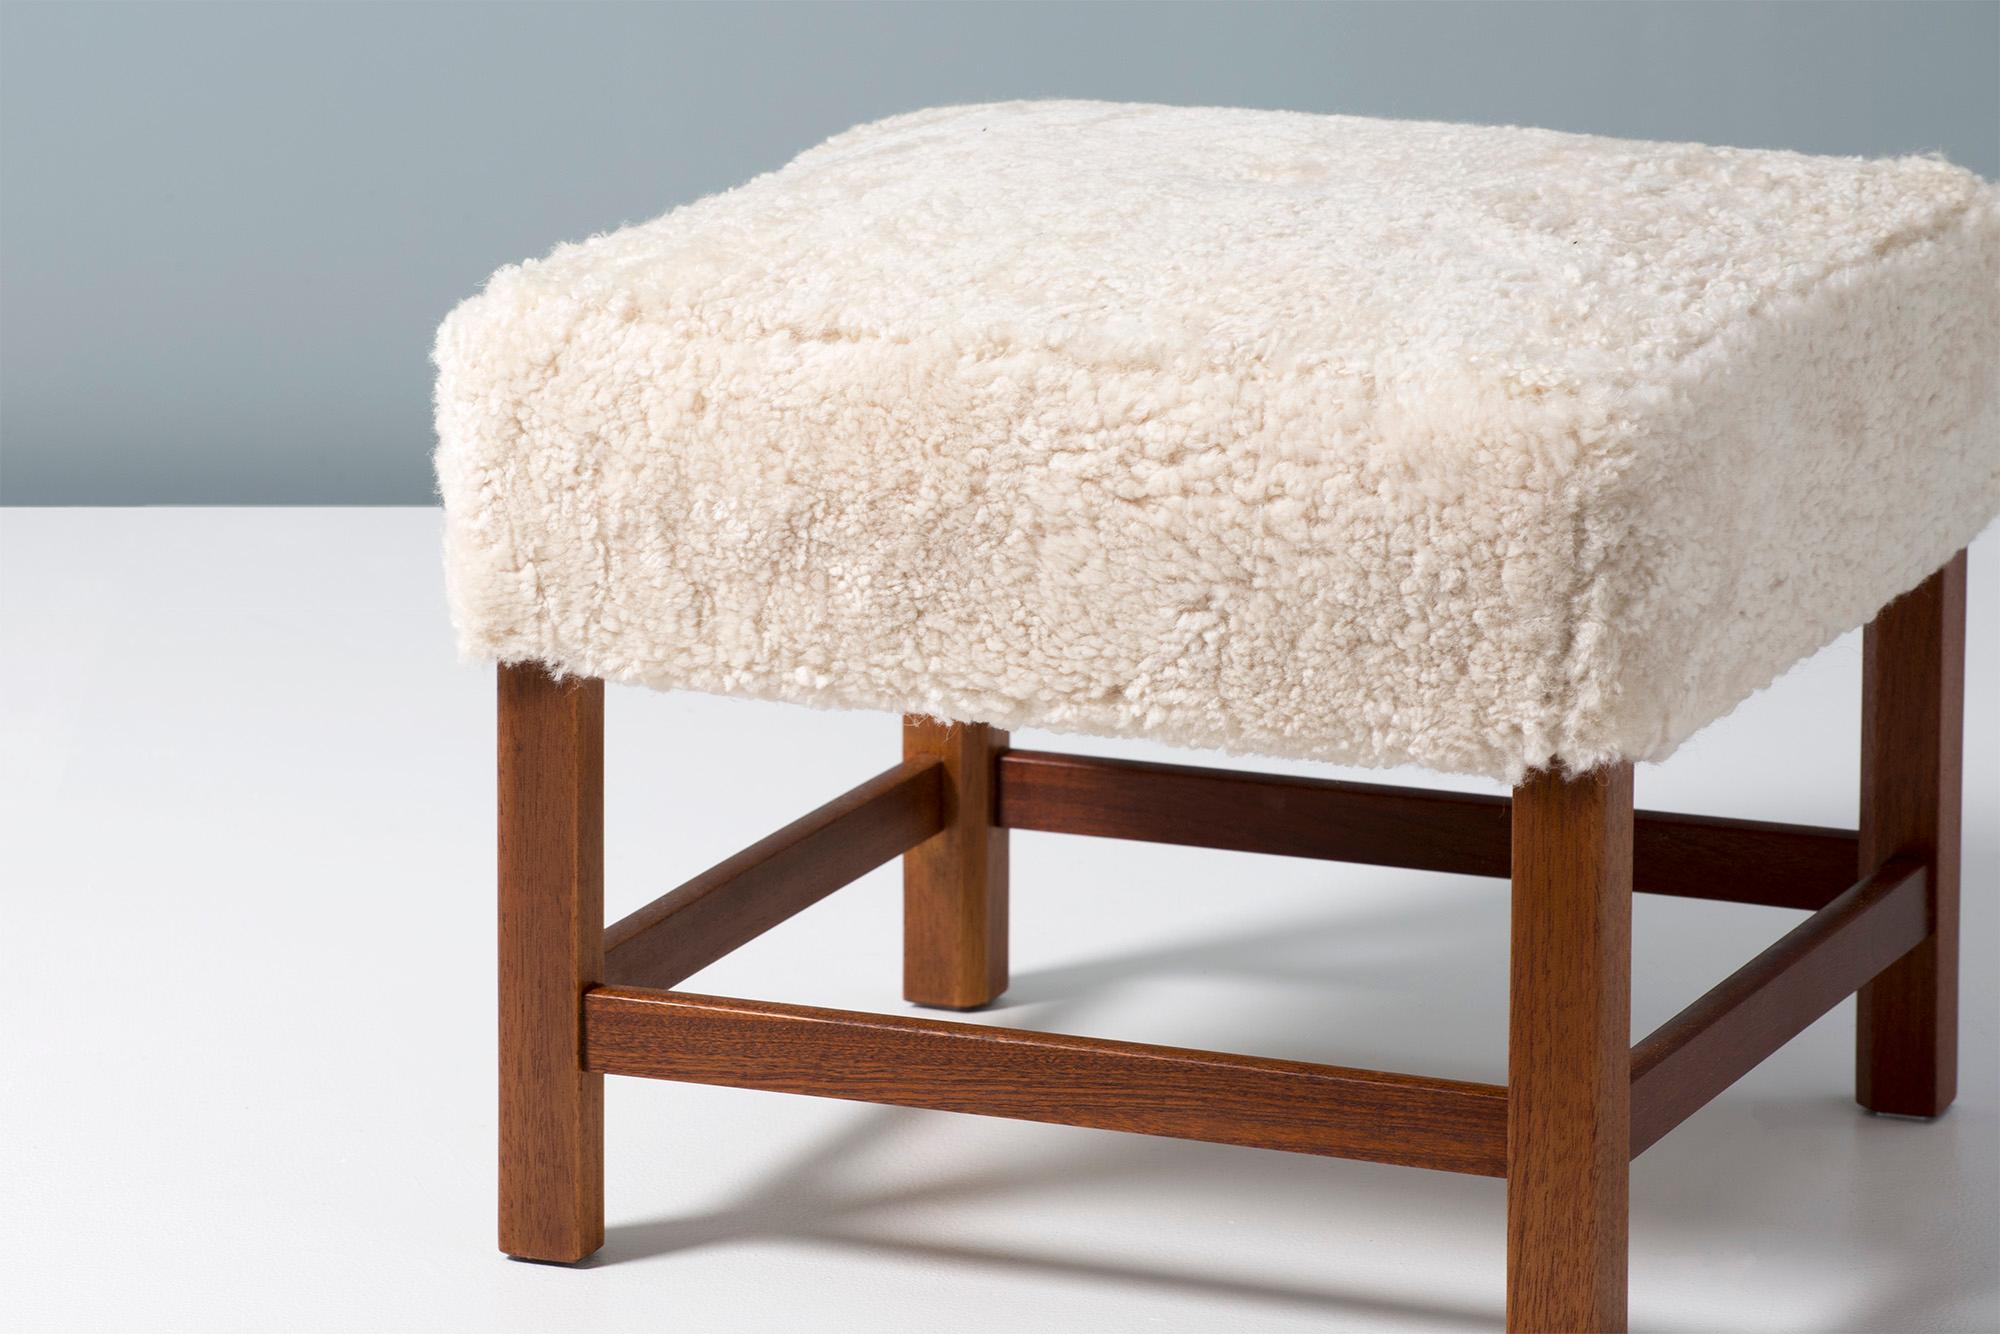 Kaare Klint

Rectangular ottoman, circa 1950s

Ottoman designed by the father of Danish modern design: Kaare Klint. Produced by master cabinetmakers Rud. Rasmussen in Denmark, the frame is made from Cuban mahogany and the seat has been